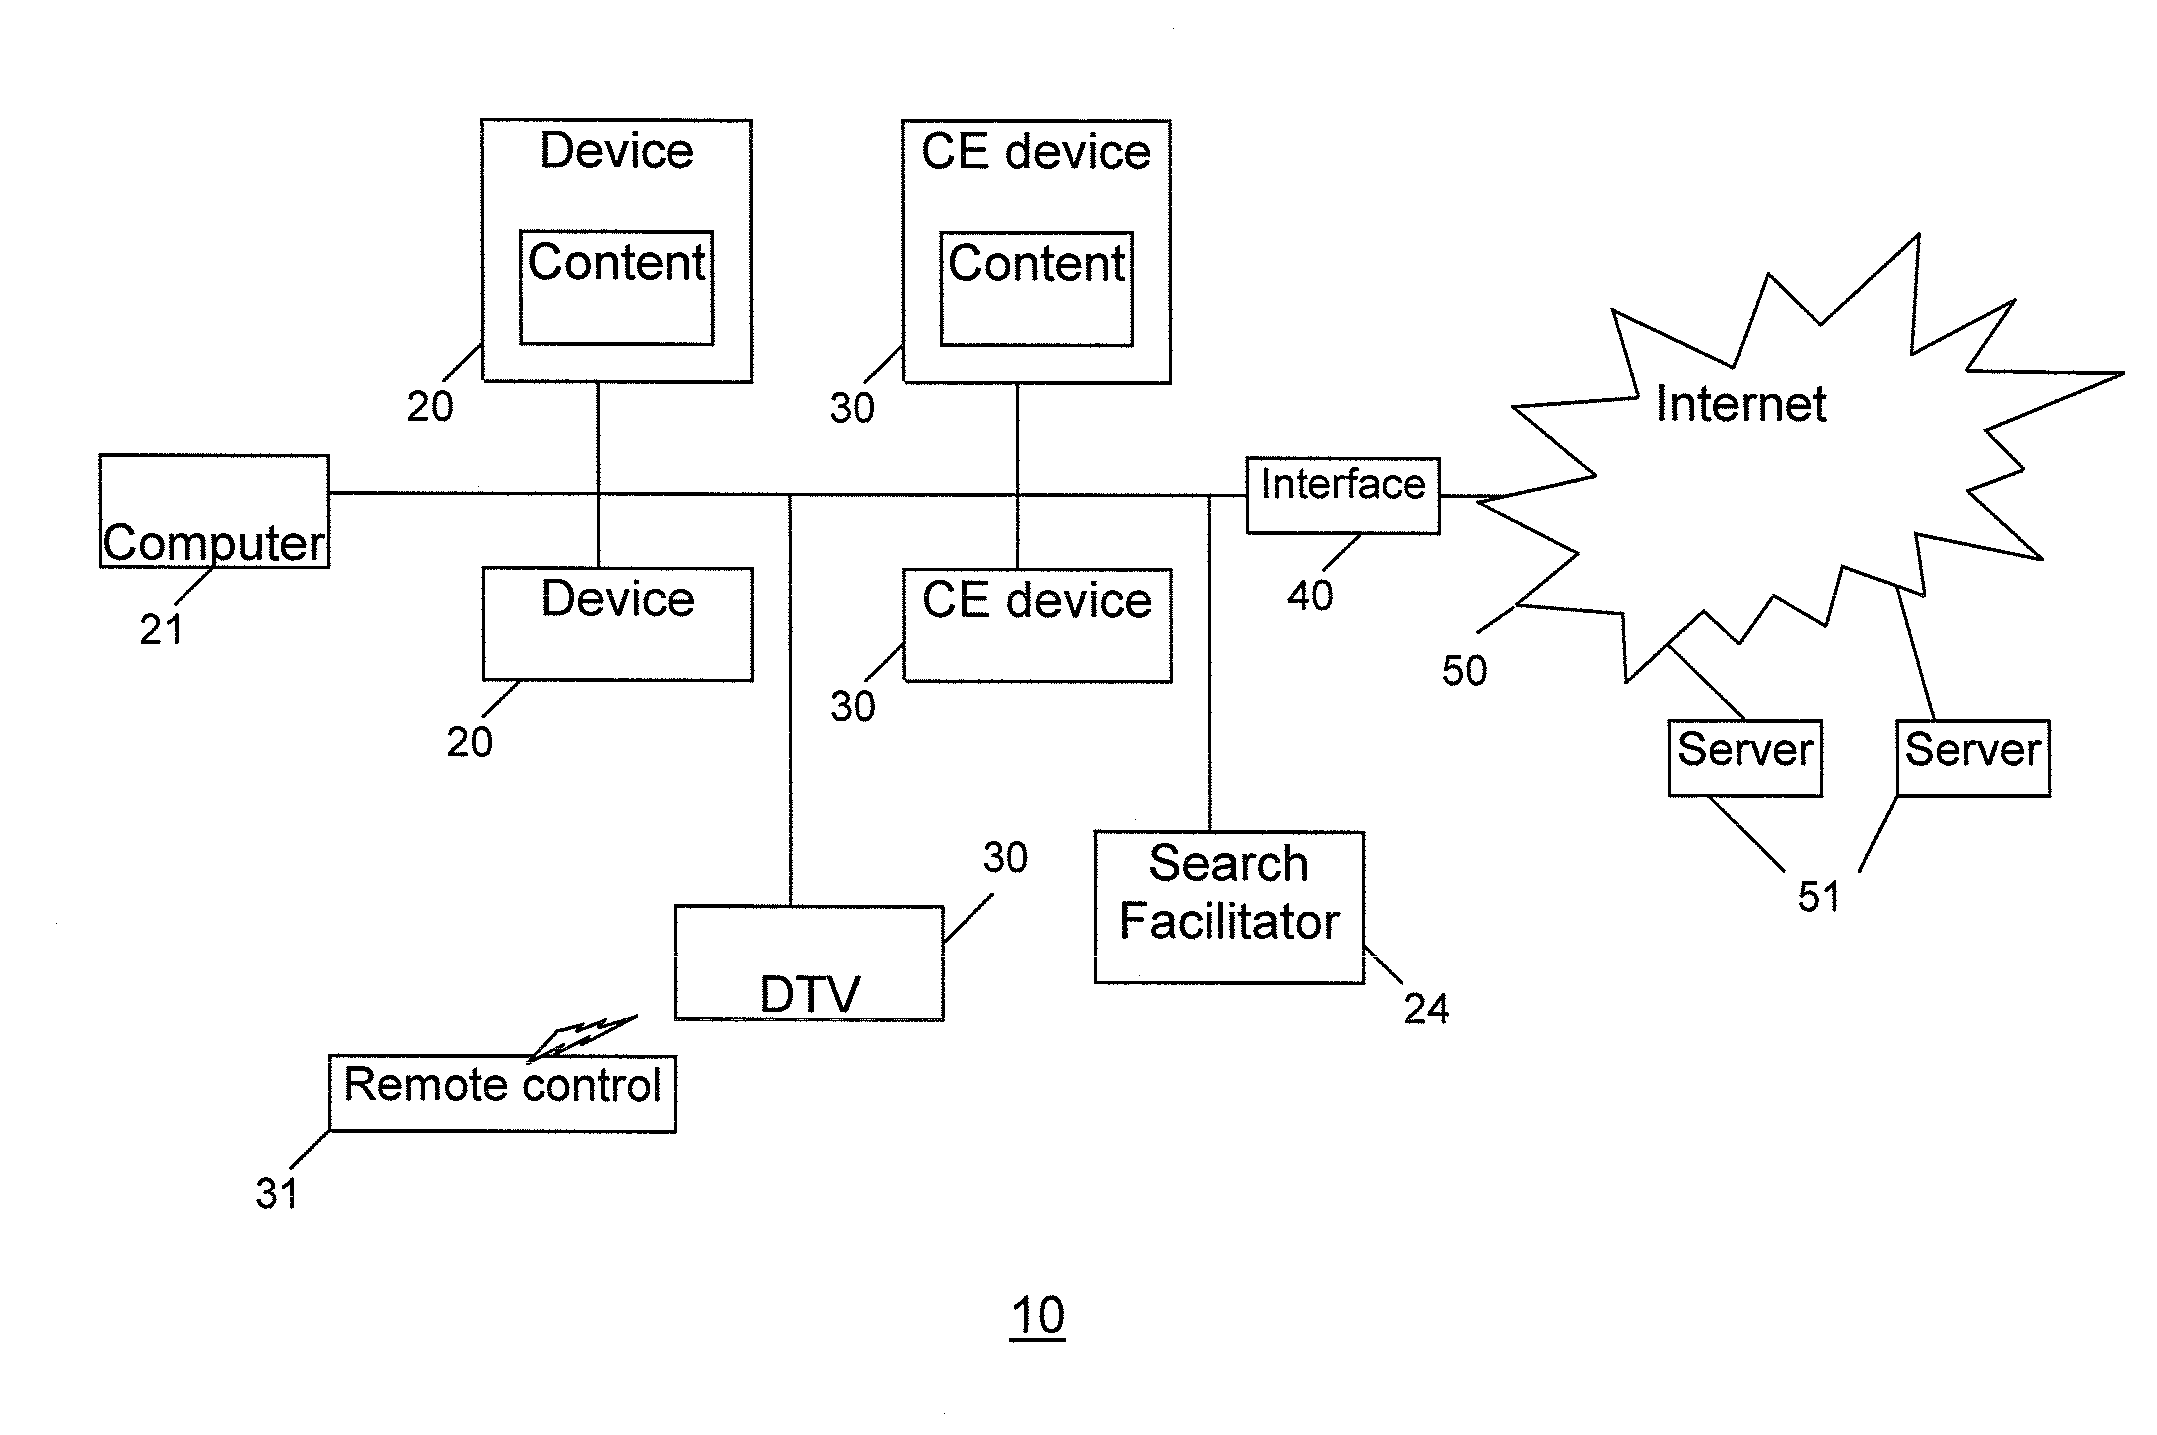 Method and system for facilitating information searching on electronic devices